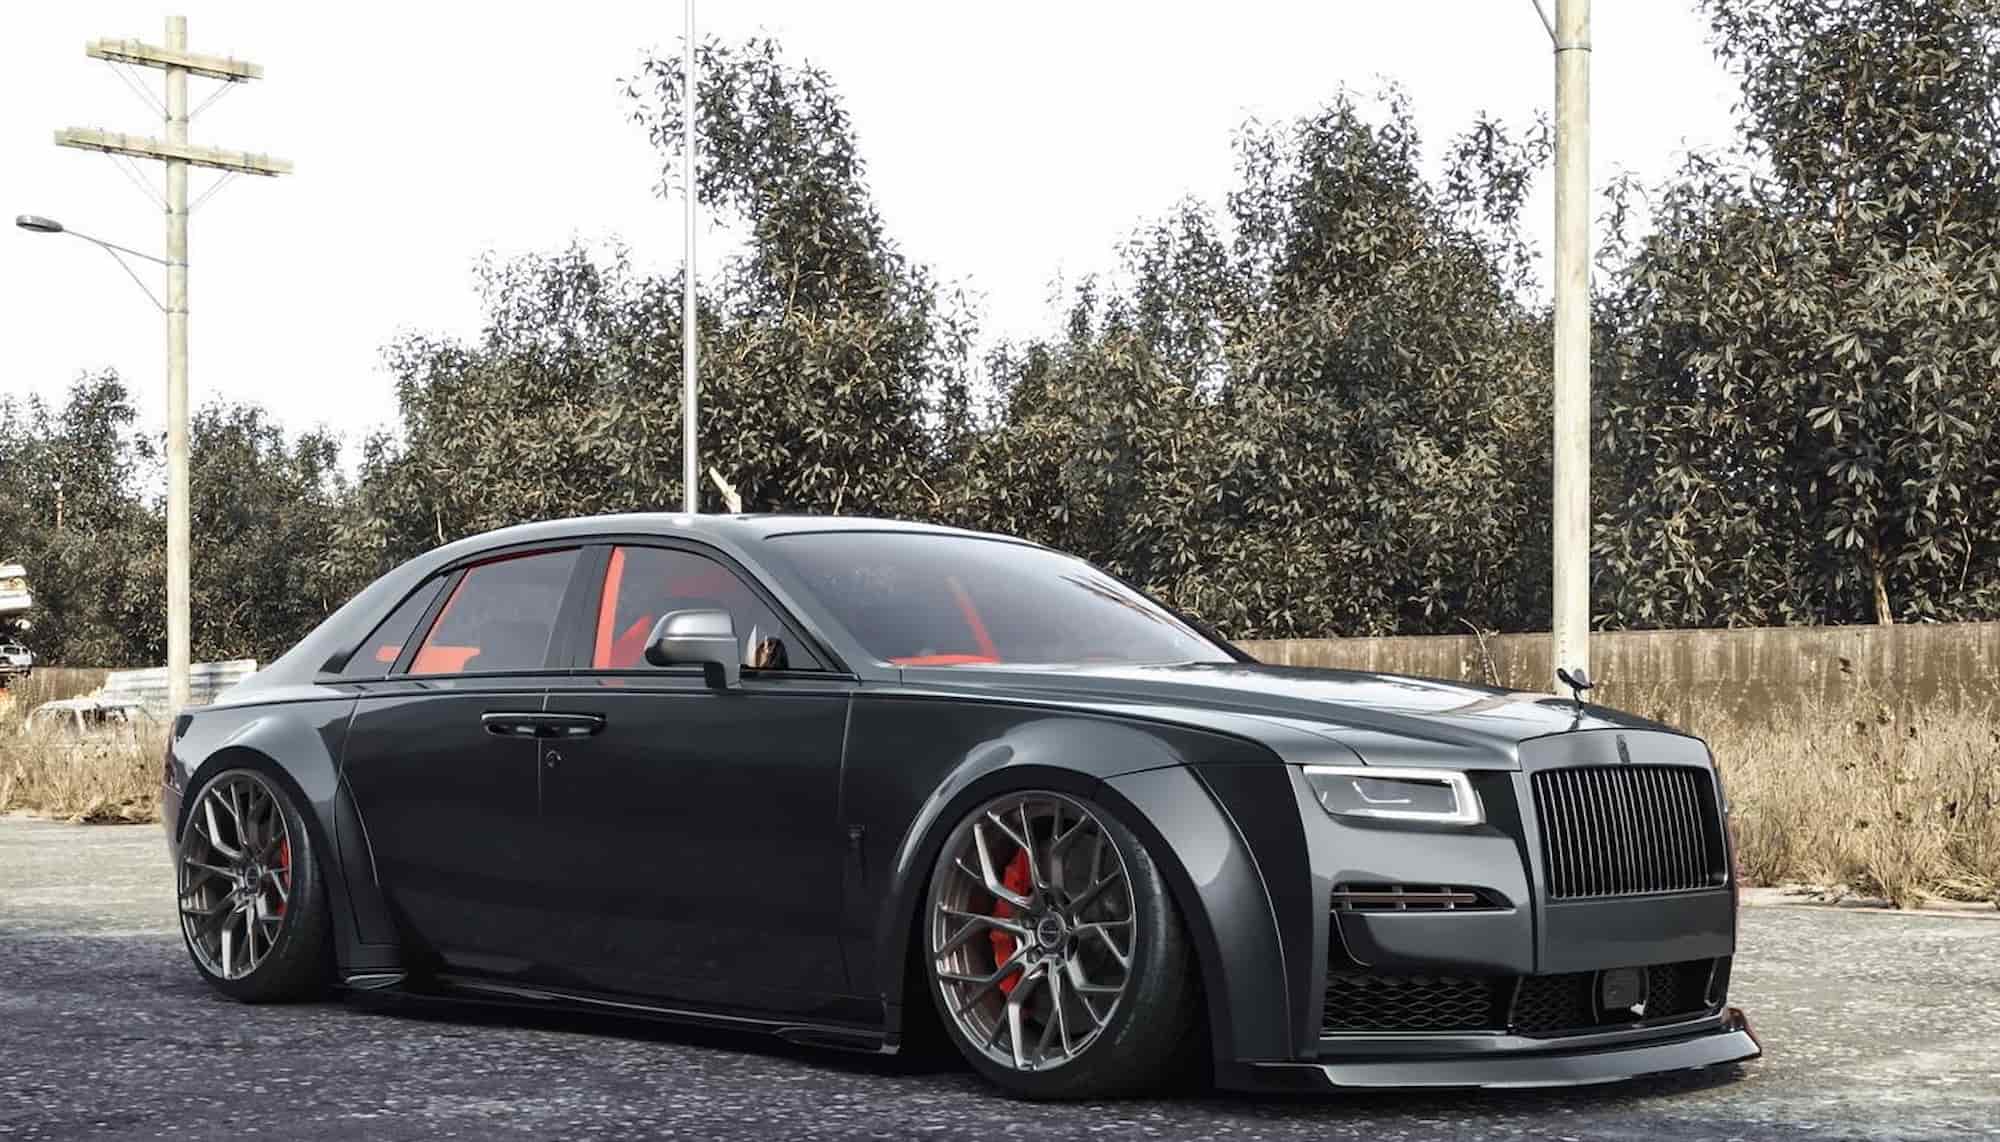 rolls royce ghost gets hooked on steroids looks like the bouncer at a car meet 198419 1